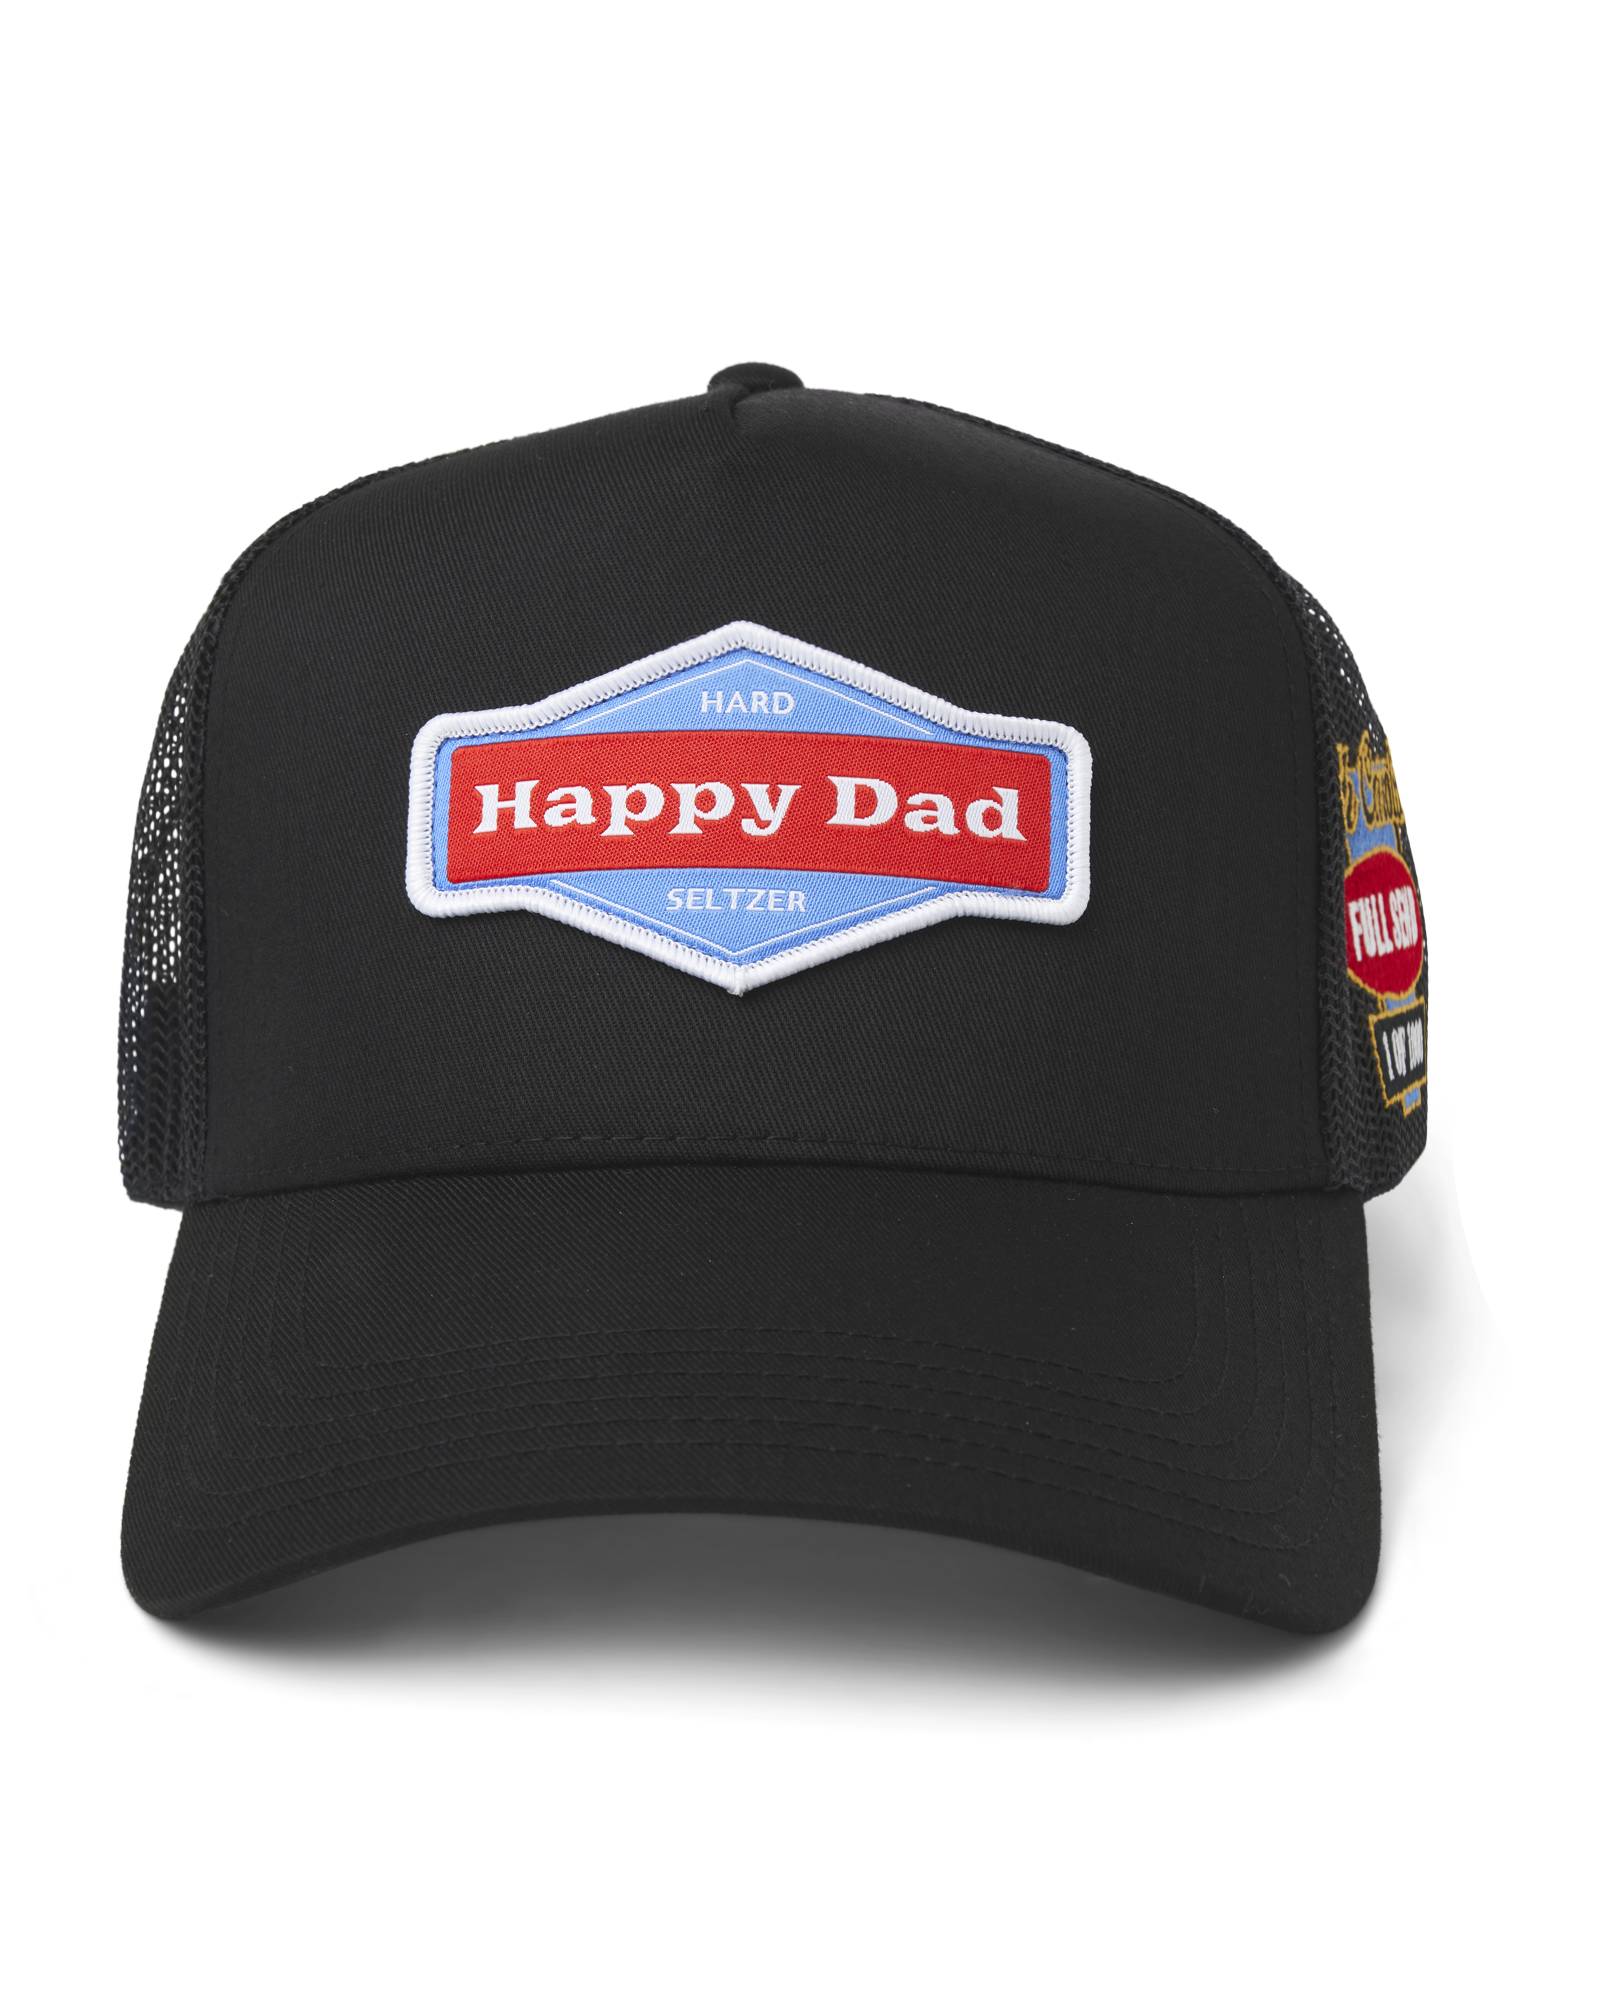 (Limited) South Carolina - Happy Dad State Trucker Hat 1 of 1000